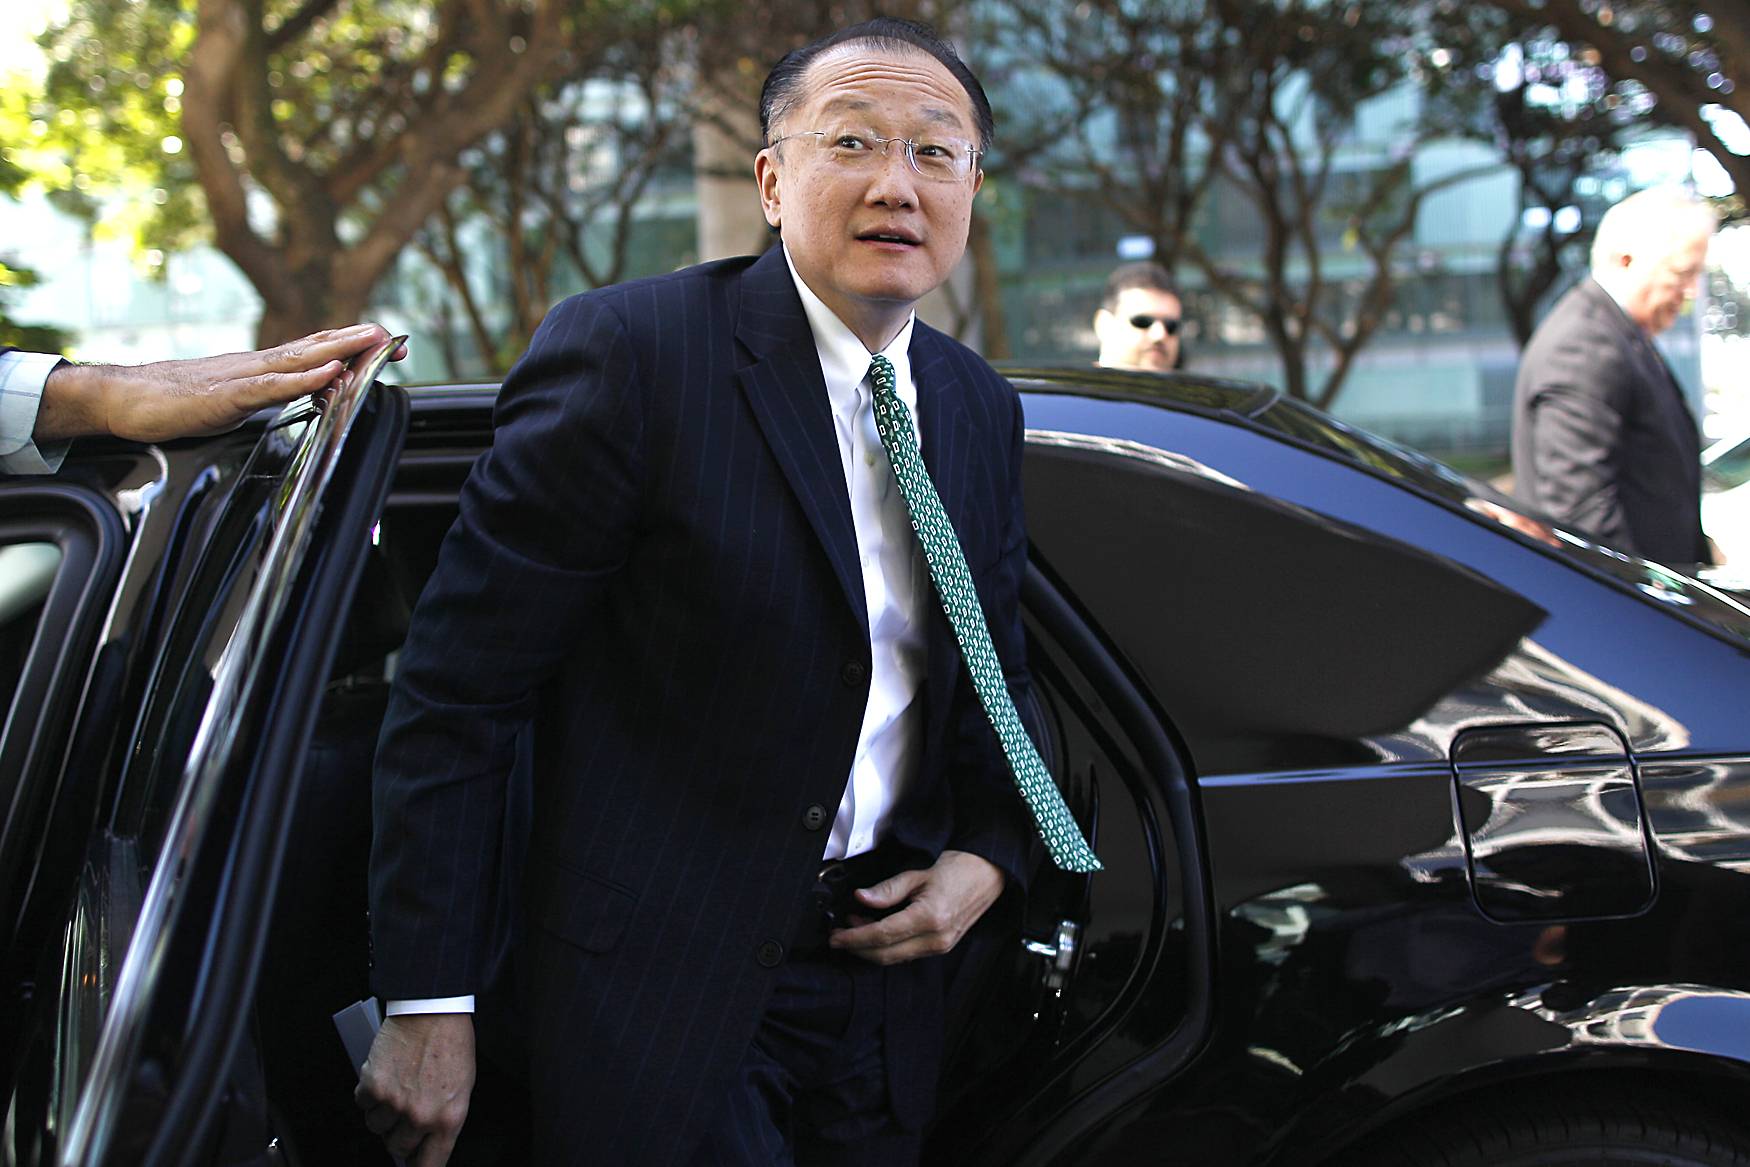 American Jim Yong Kim to Lead World Bank - The 52-year-old health expert Jim Yong Kim was chosen by the World Bank's board Monday to serve as the organization's next president, beating out the developing world’s favorite, Nigerian finance minister Ngozi Okonjo-Iweala. Okonjo-Iweala’s candidacy marked the first time a non-American was considered for the post. Days prior to the decision, former Colombian finance minister Jose Antonio Ocampo dropped his candidacy for the post, calling the race a “political exercise.”\r(Photo: REUTERS/Ueslei Marcelino)